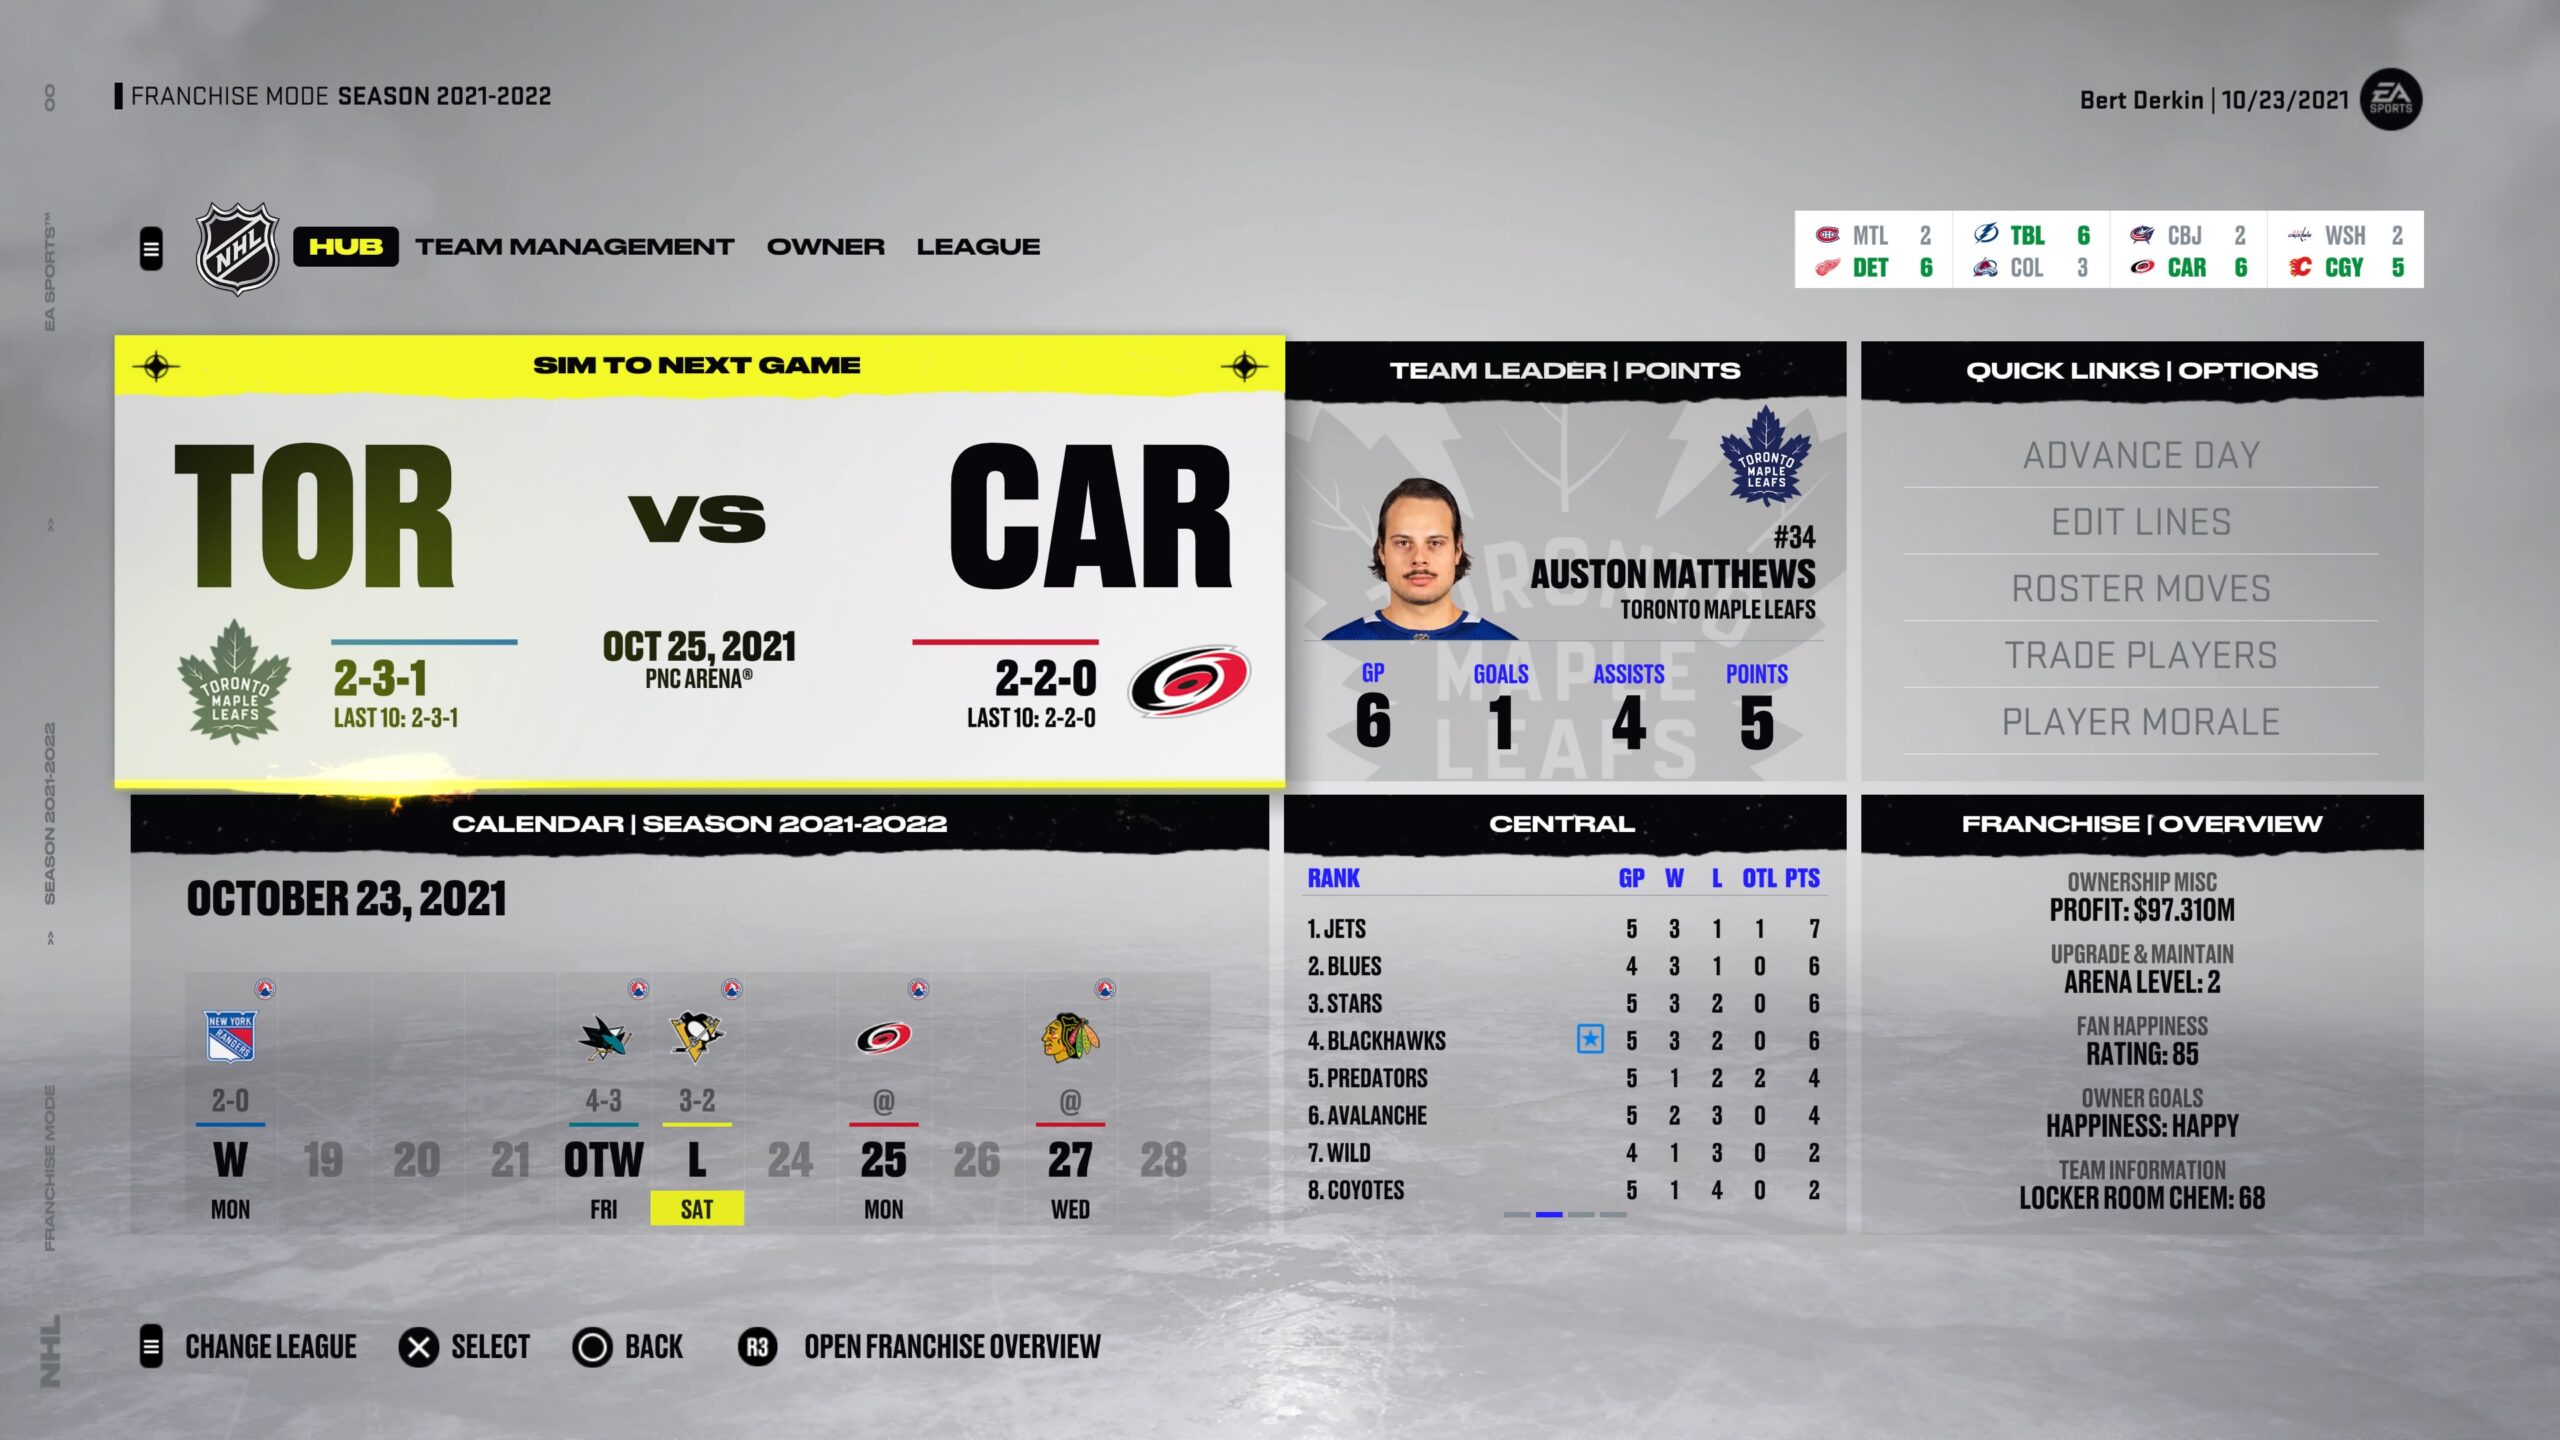 NHL 22 Makes Successful Transition to Next-Gen Consoles